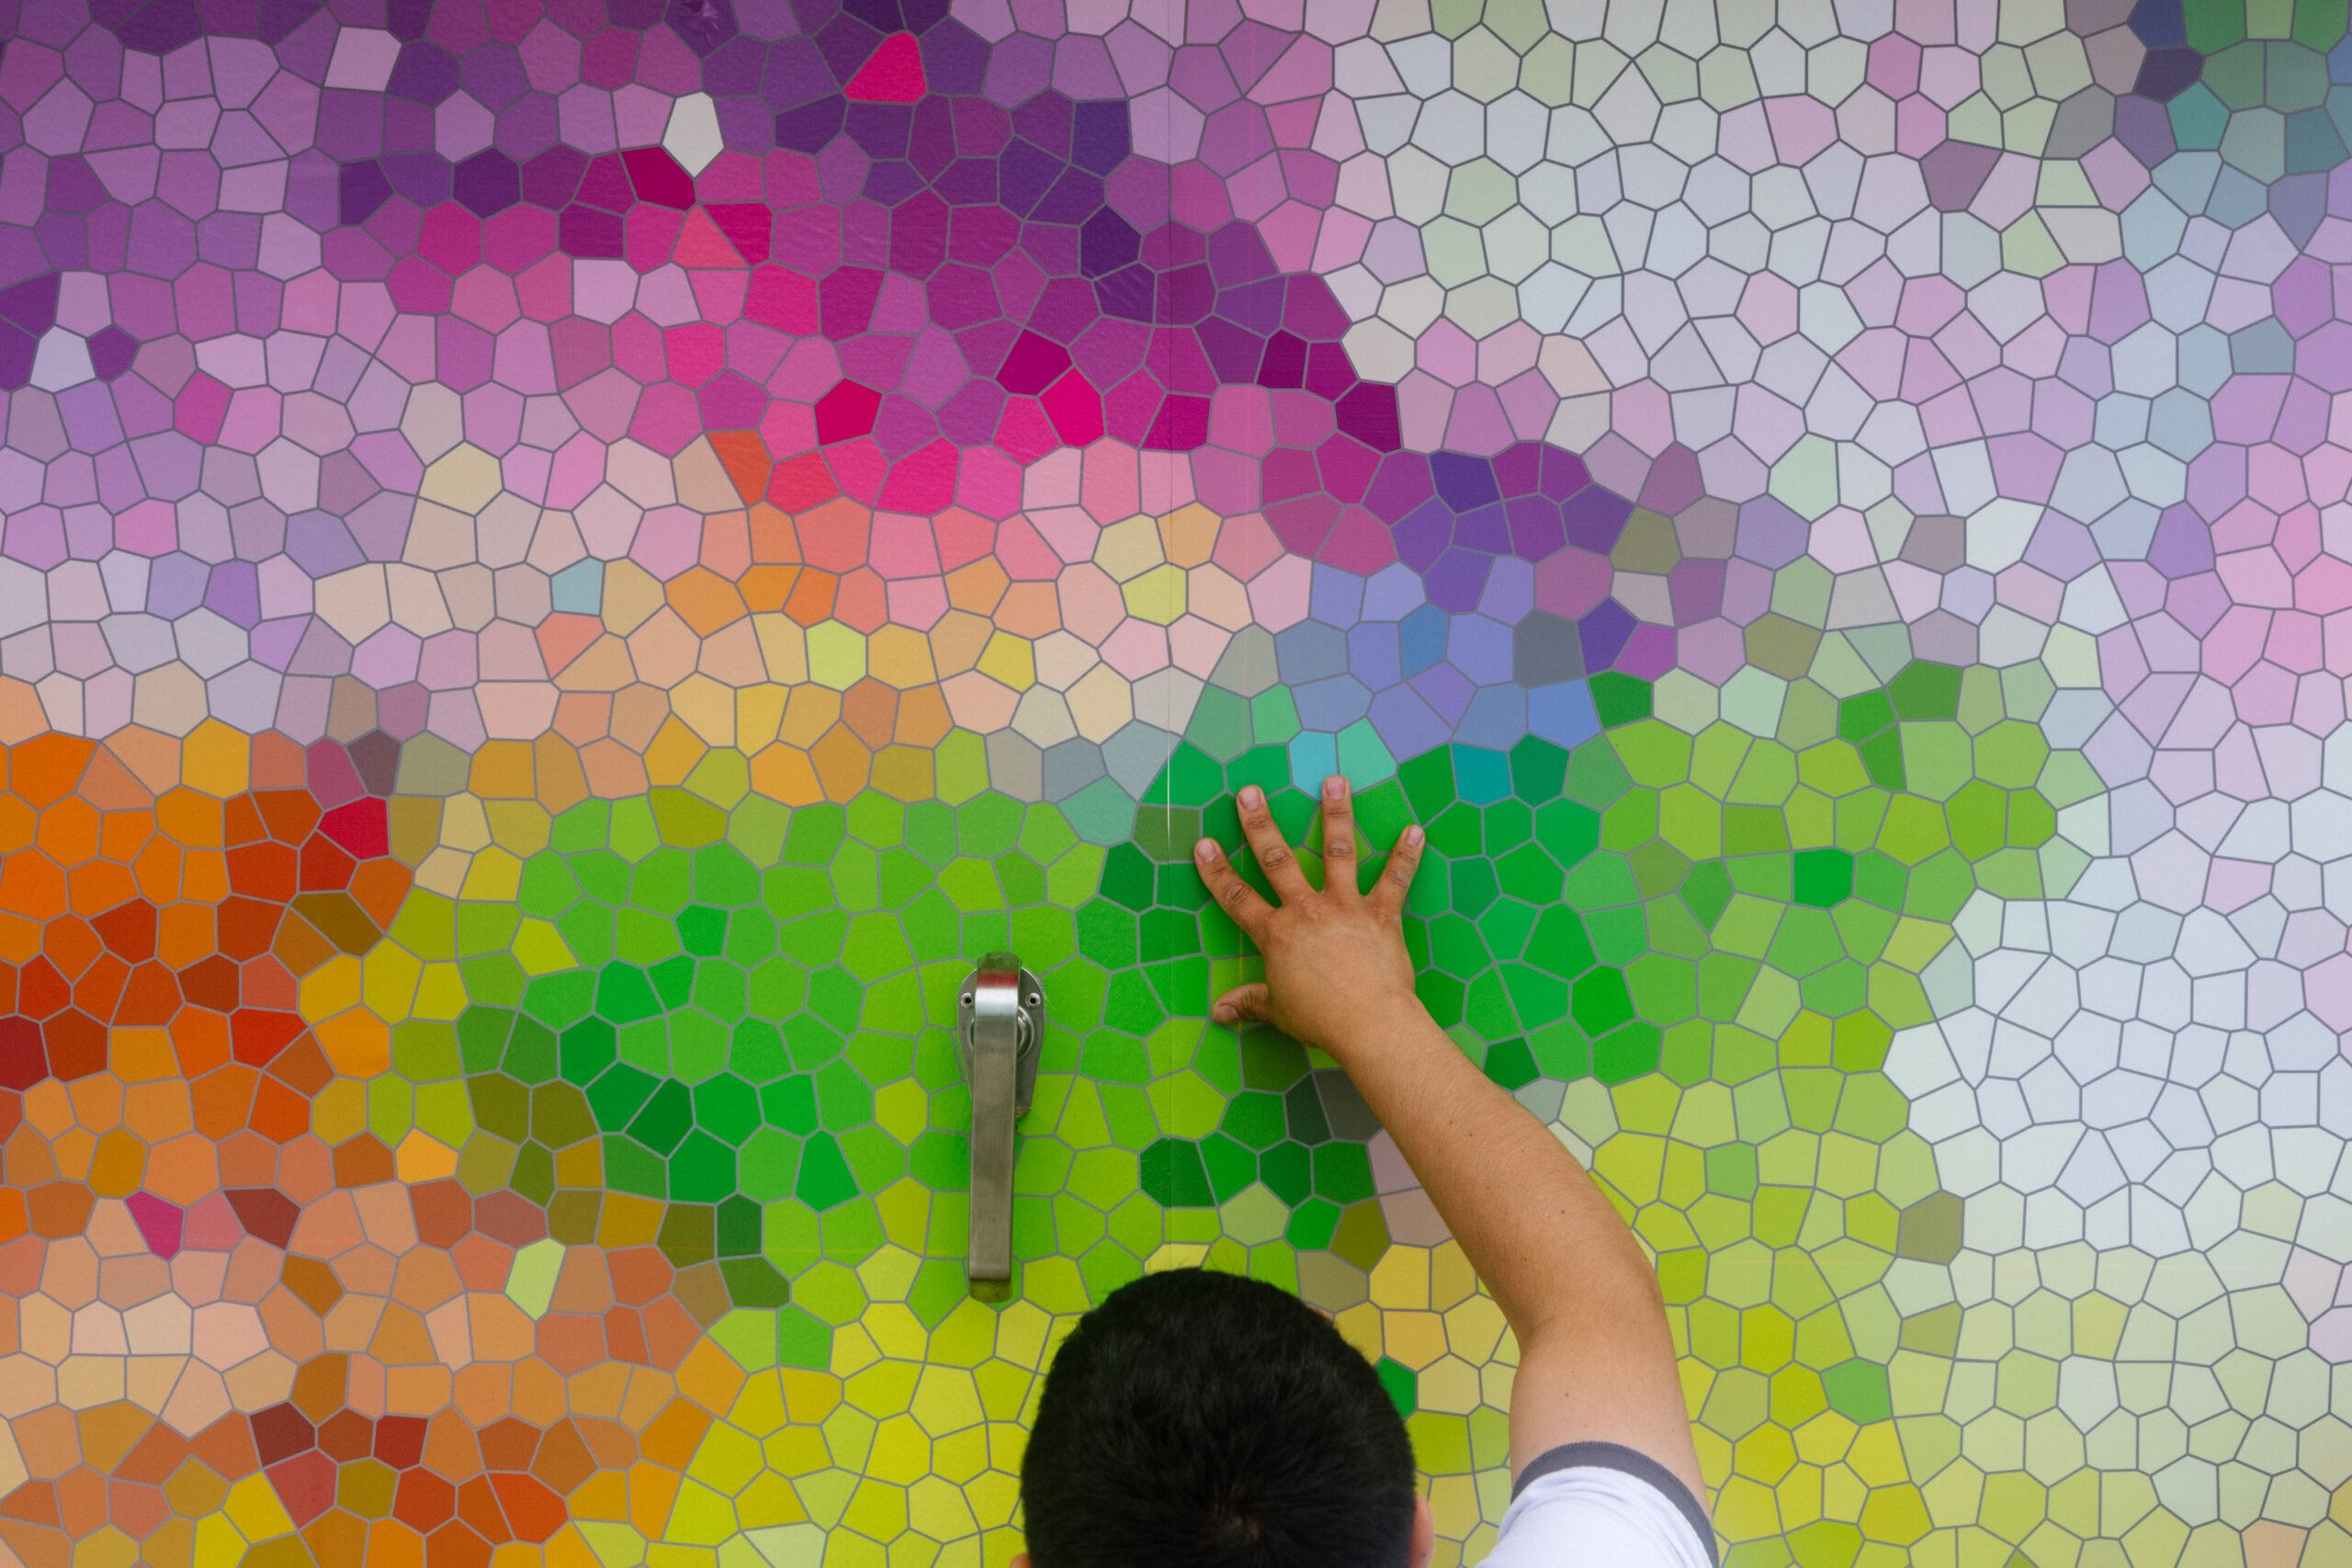 A student places their hand on a large surface covered by a brightly-colored mosaic of tiles.